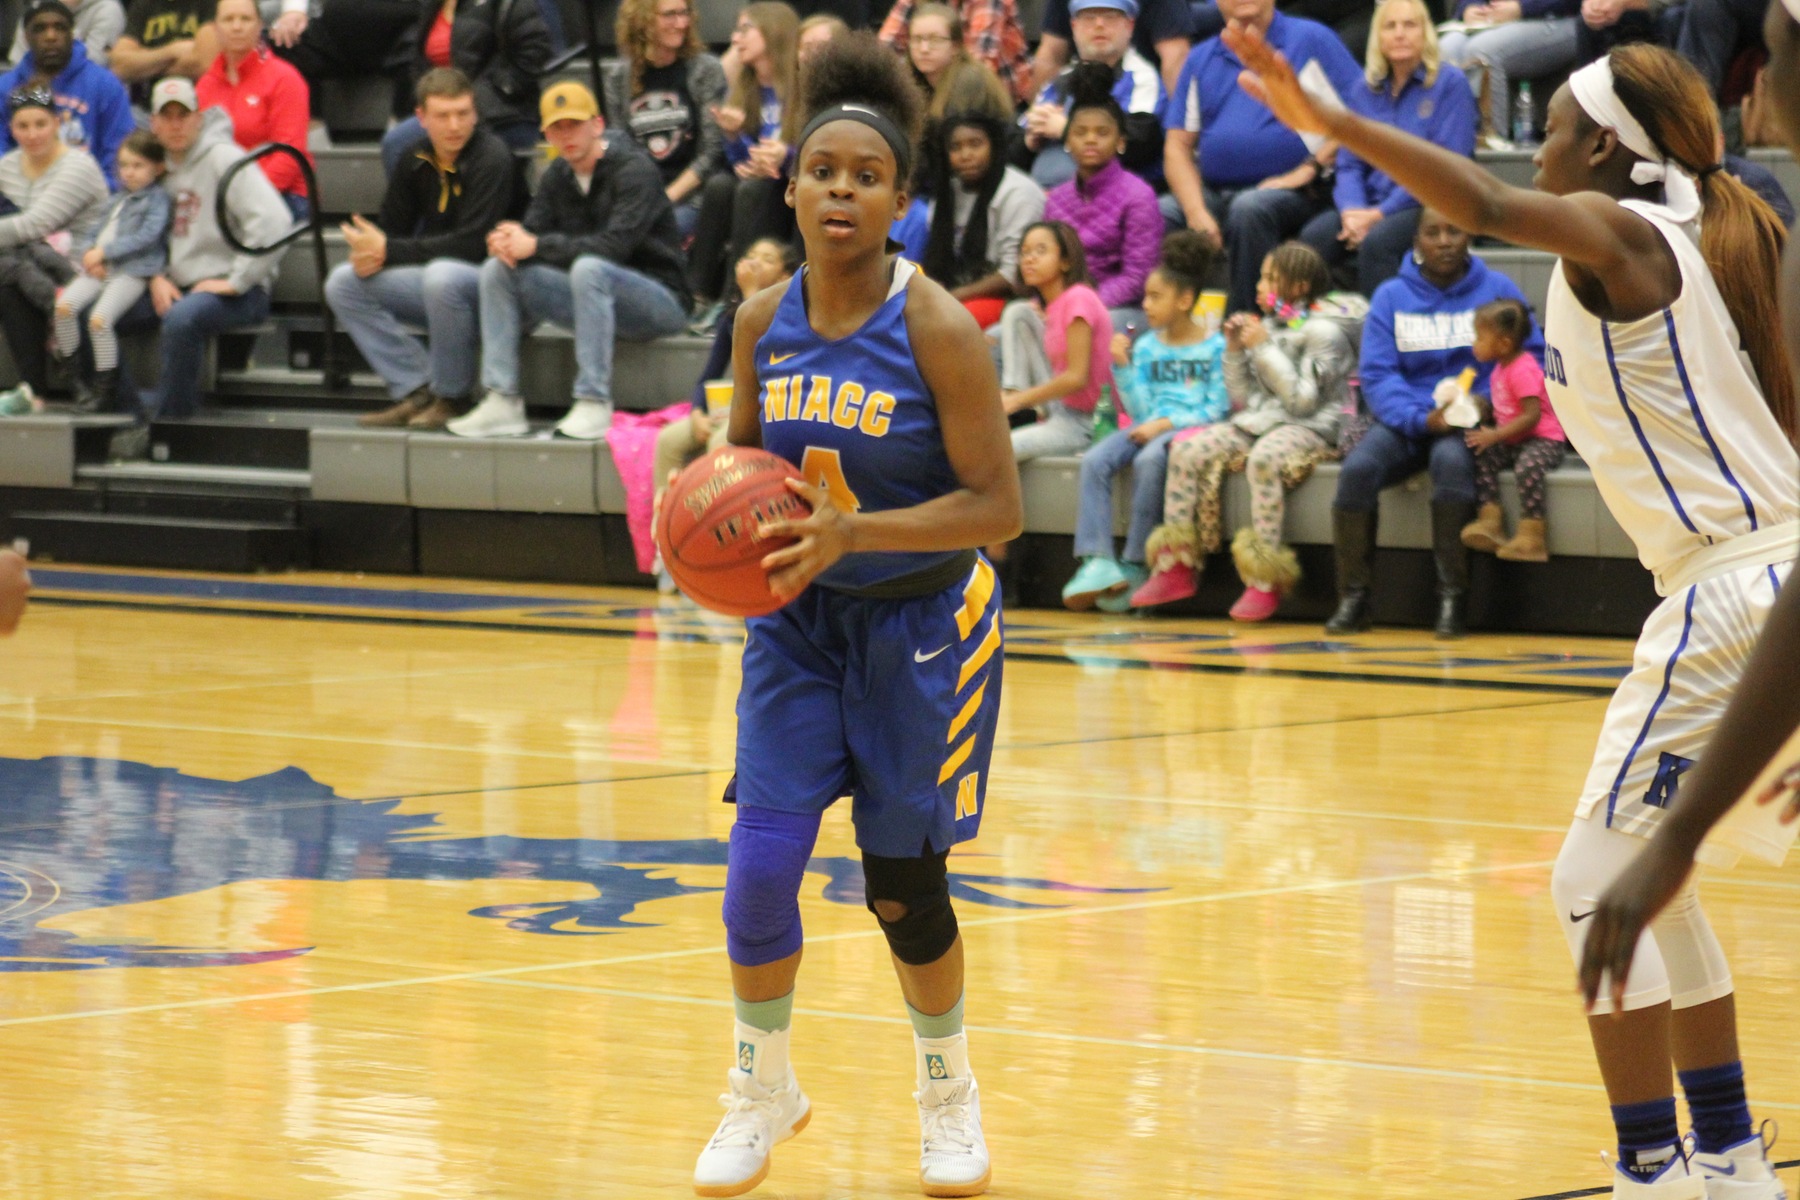 NIACC's UU Longs looks to pass the ball during the second half of Sunday's regional title game against Kirkwood.